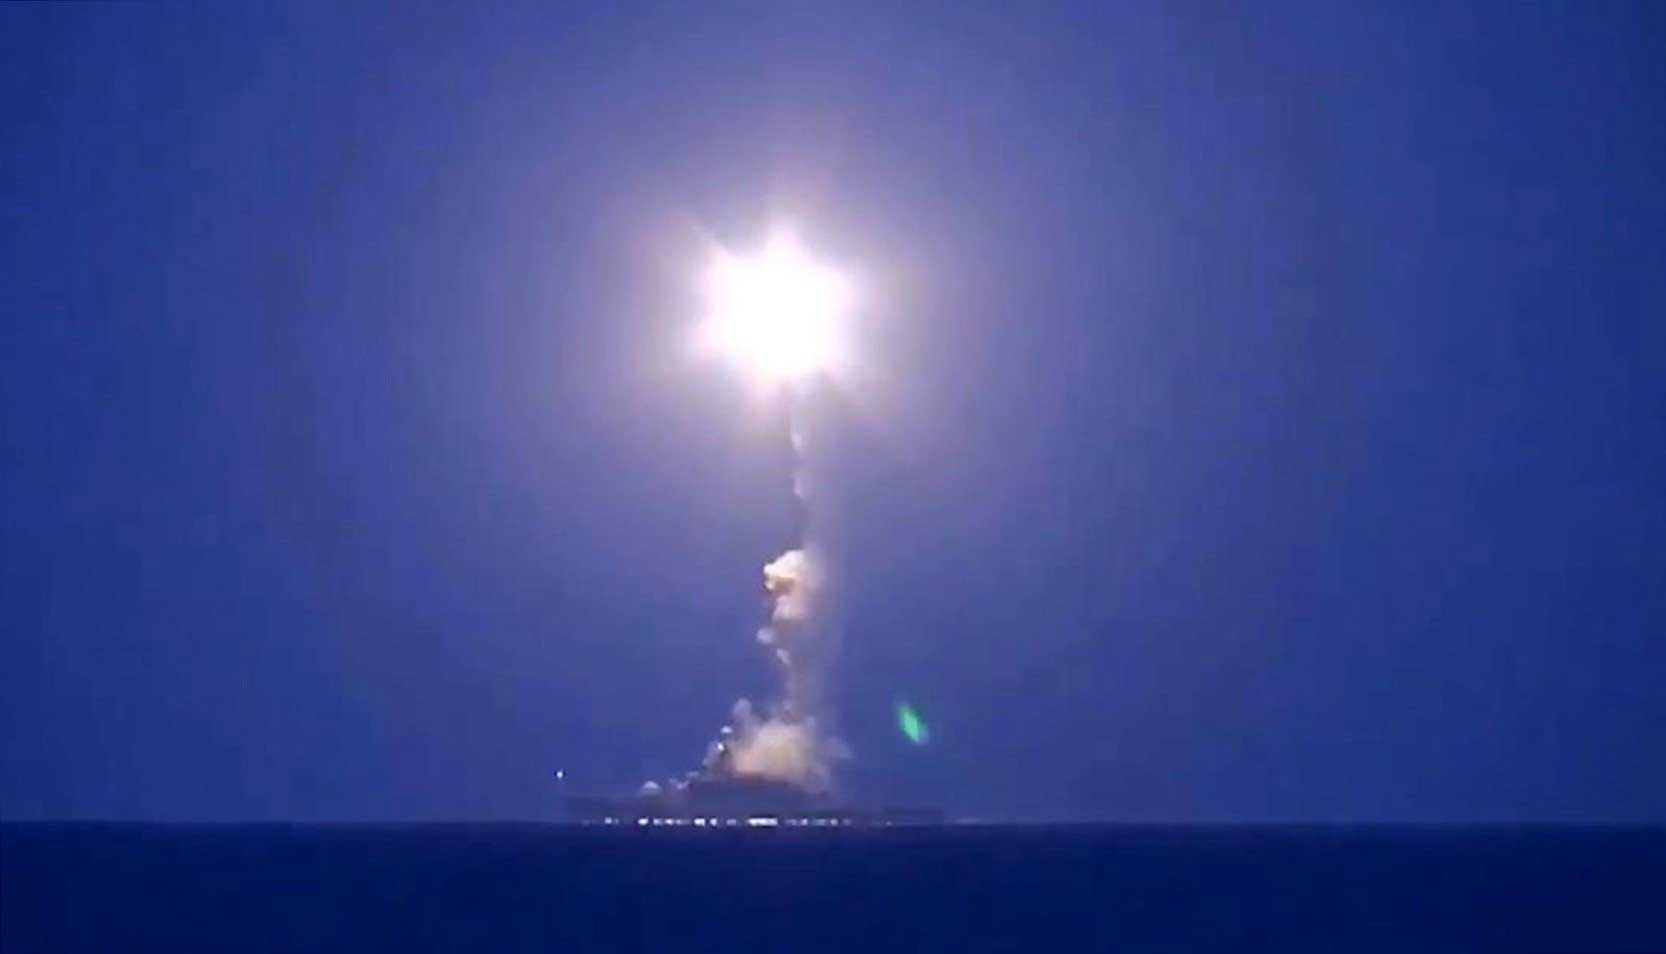 Russian Navy delivers air strikes from Caspian Sea against ISIS targets in Syria